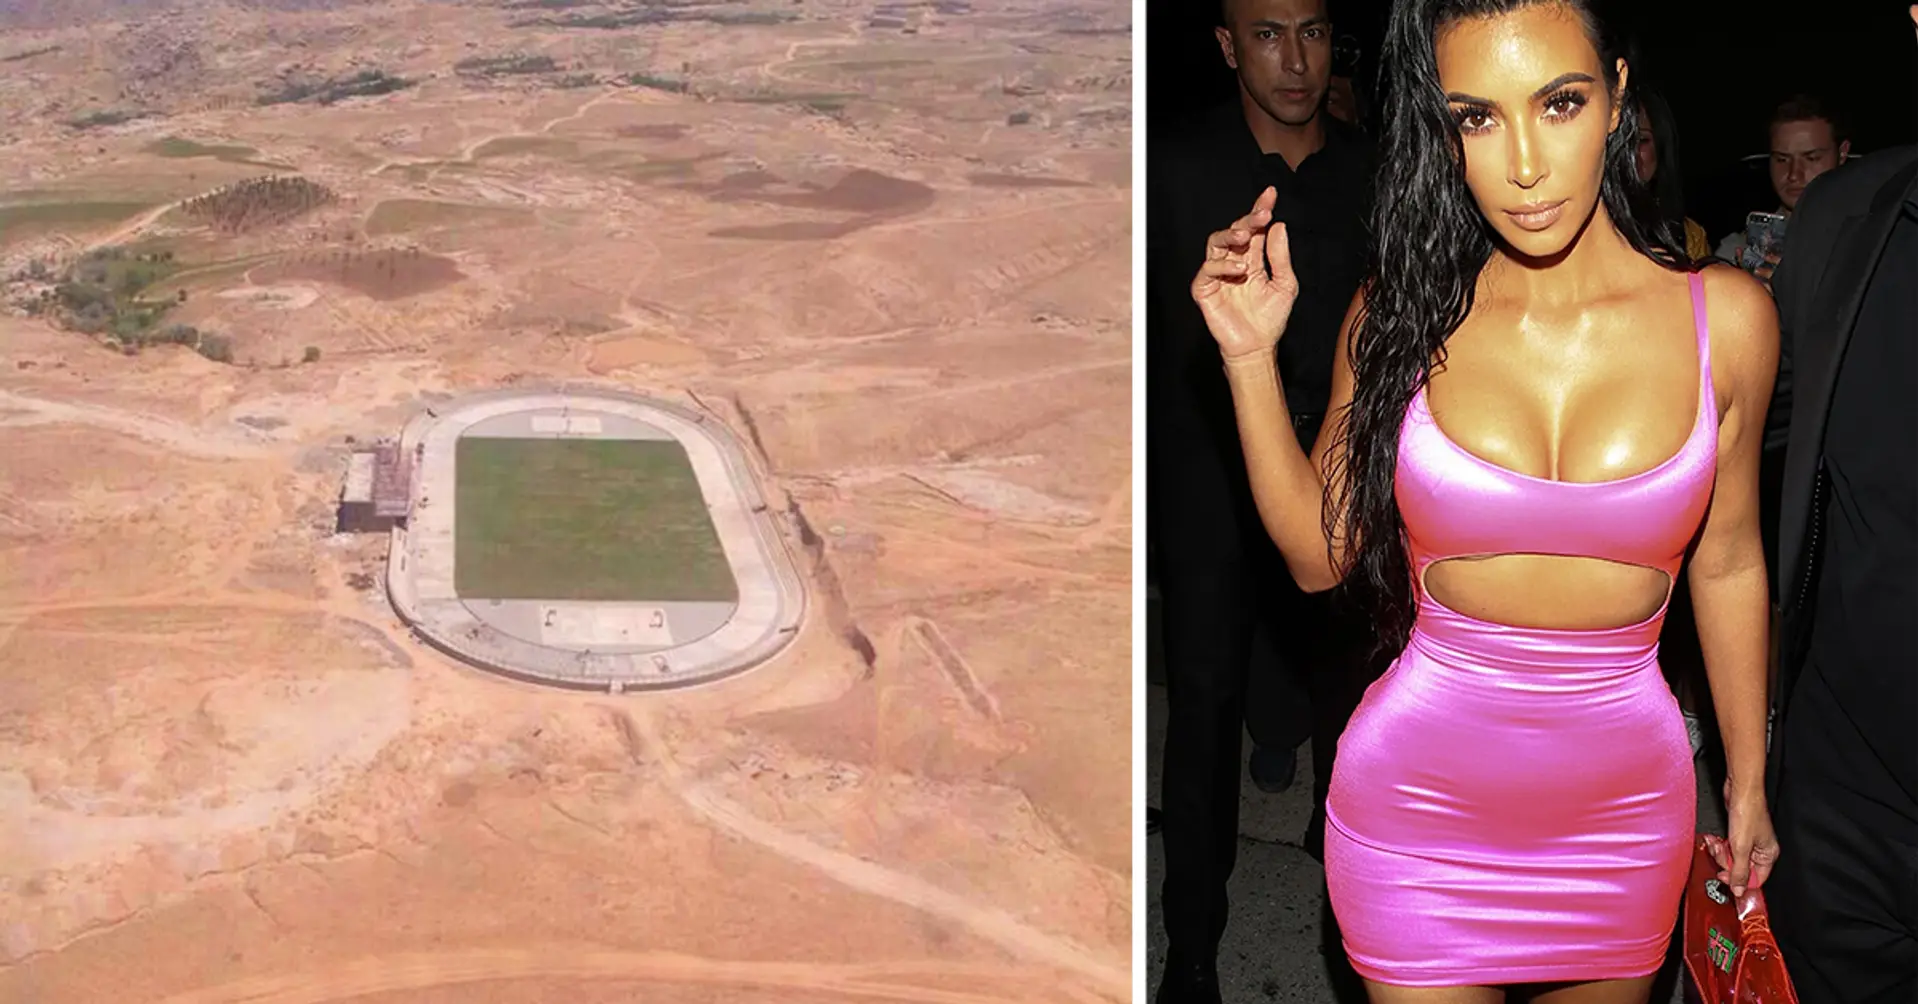 Incredible: Kim Kardashian helps 130 footballers escape from Afghanistan